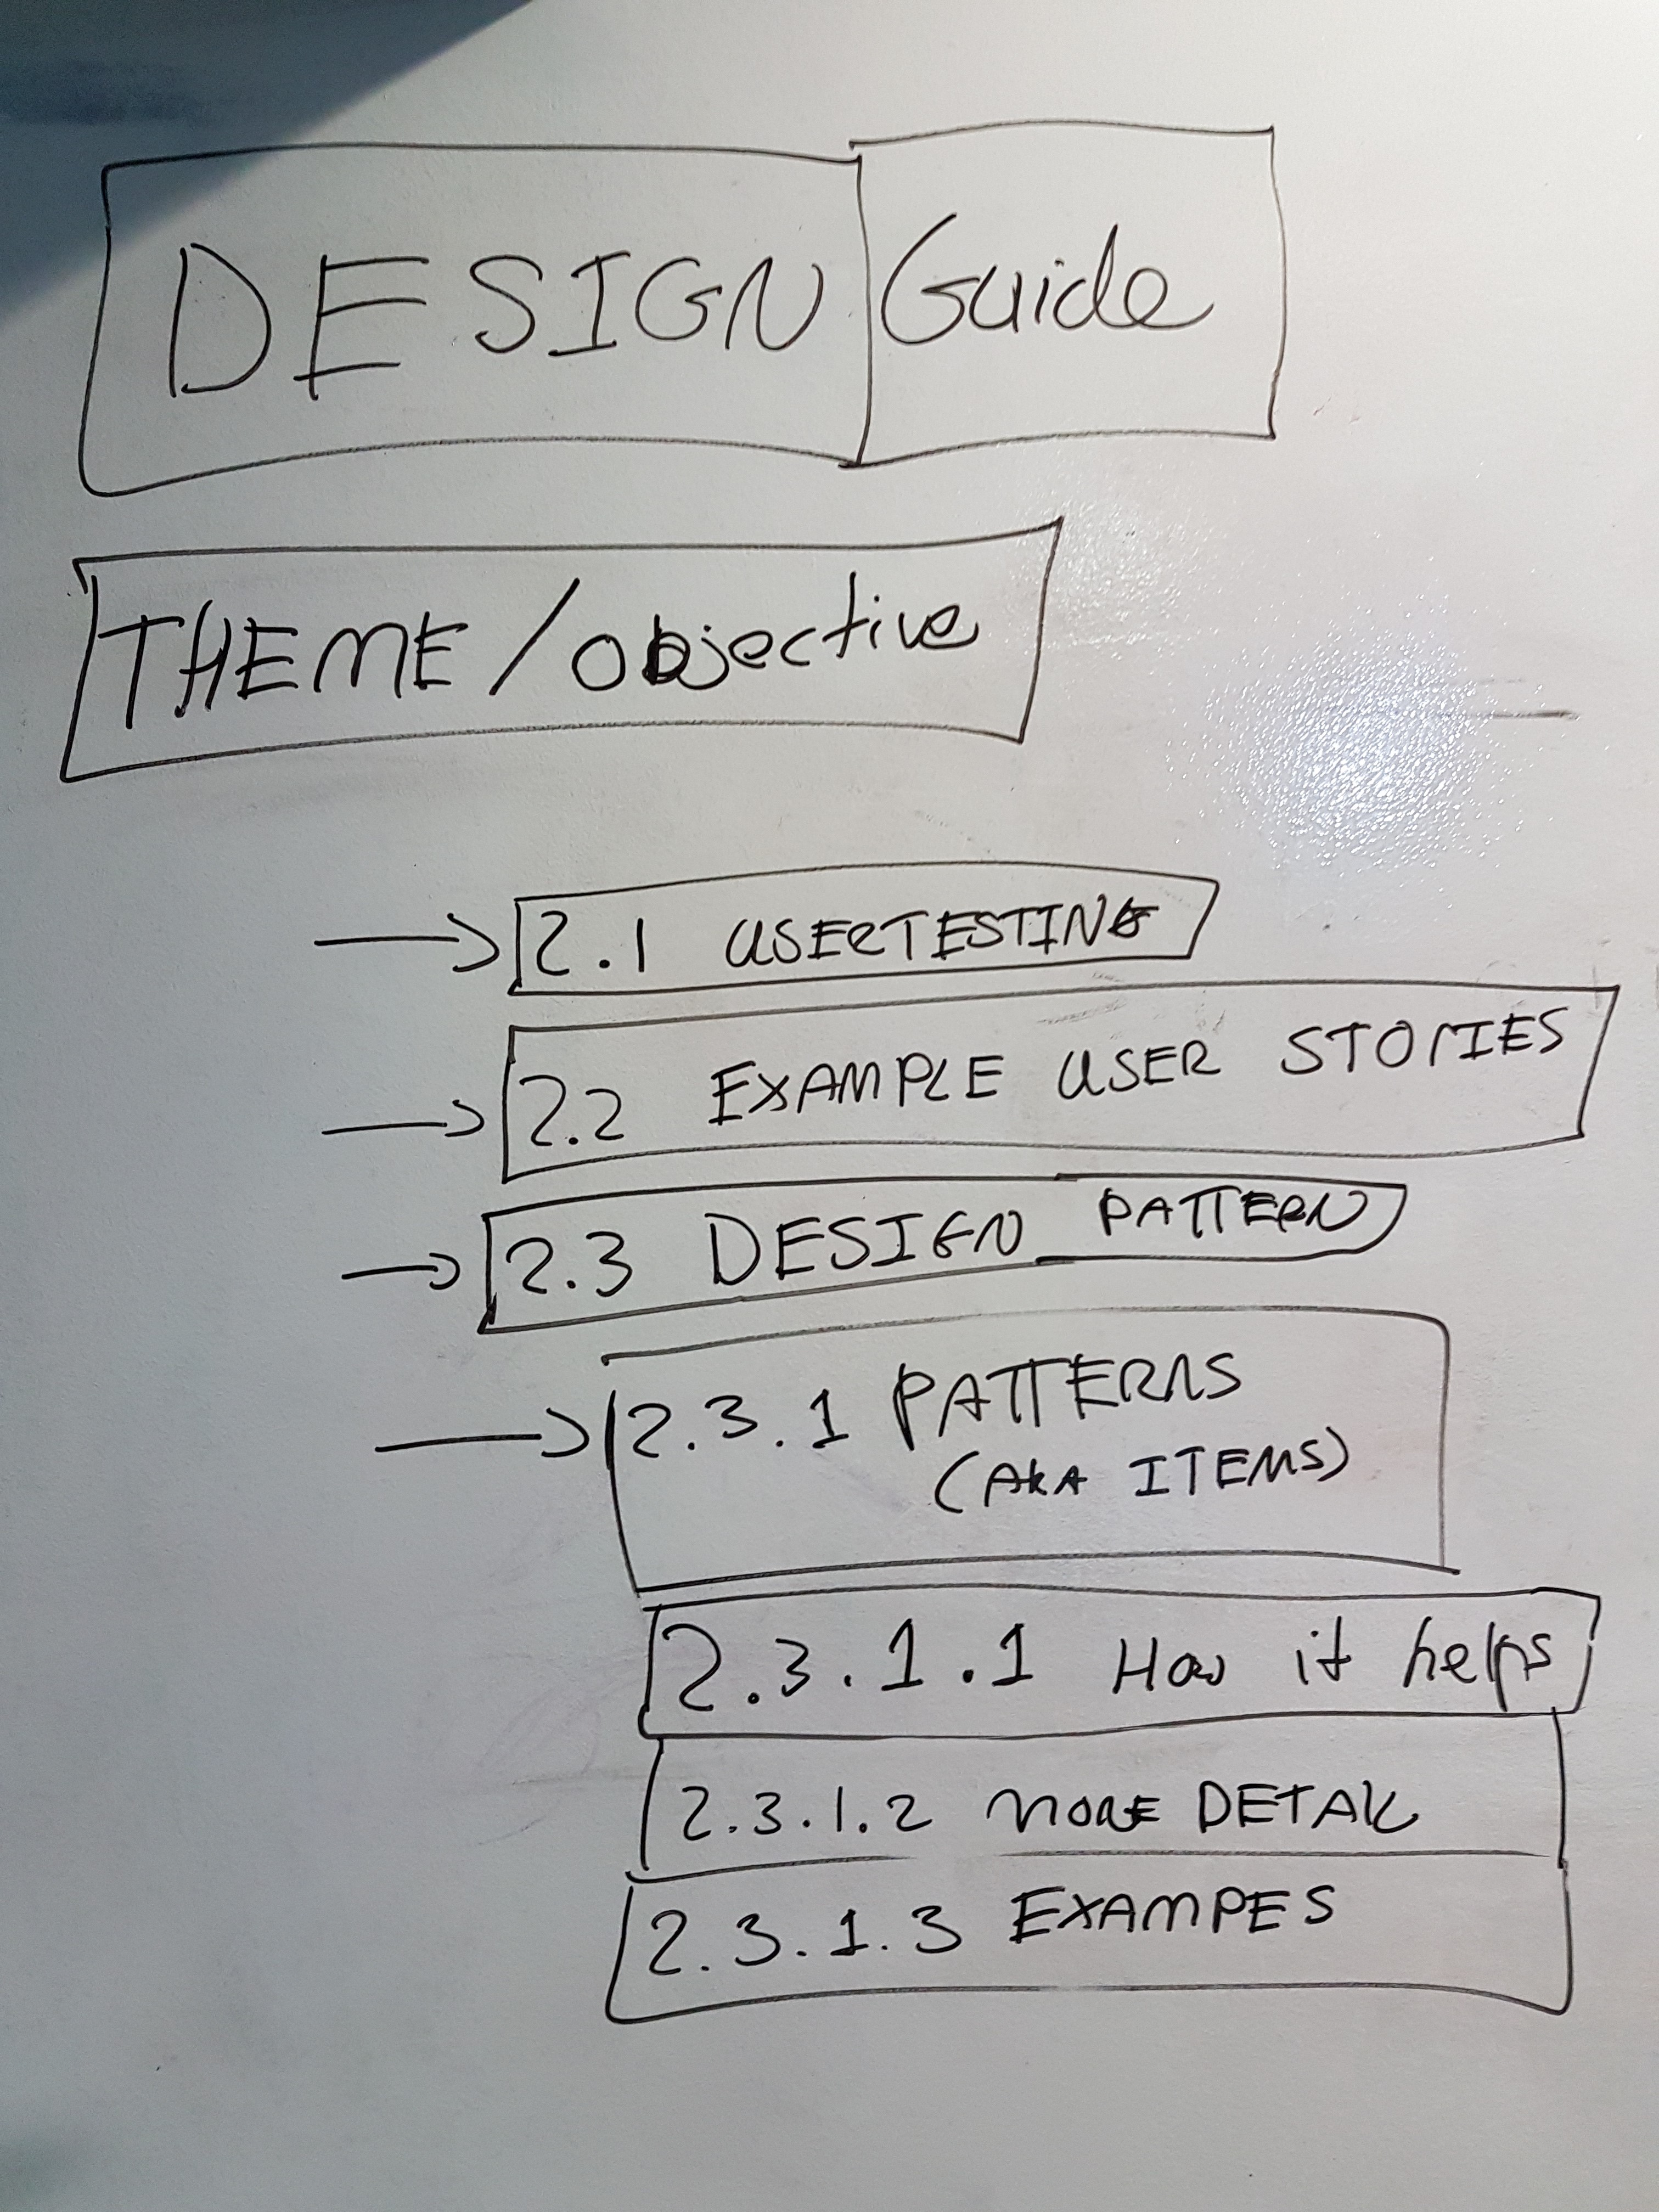 Photograph of whiteboard drawing